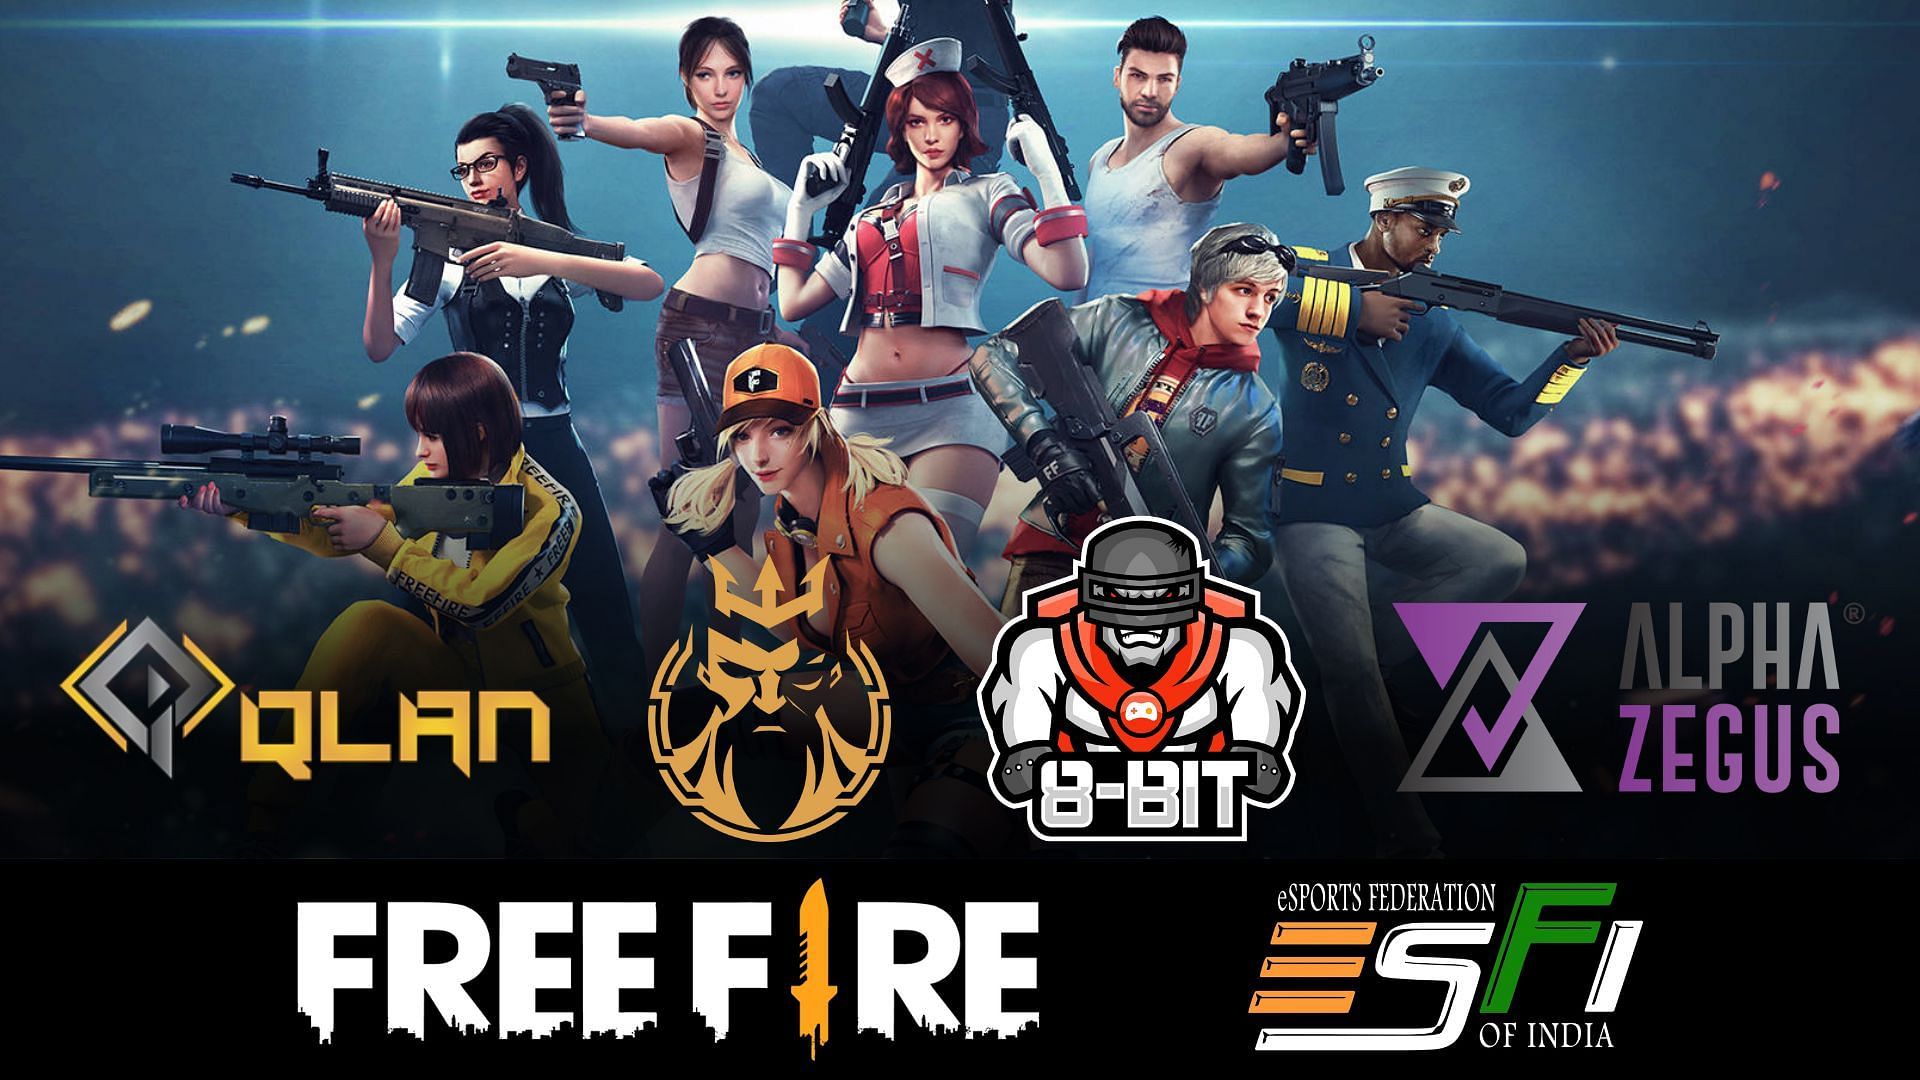 Battle royale game 'Free Fire' set to make comeback in India after a  year-long ban 